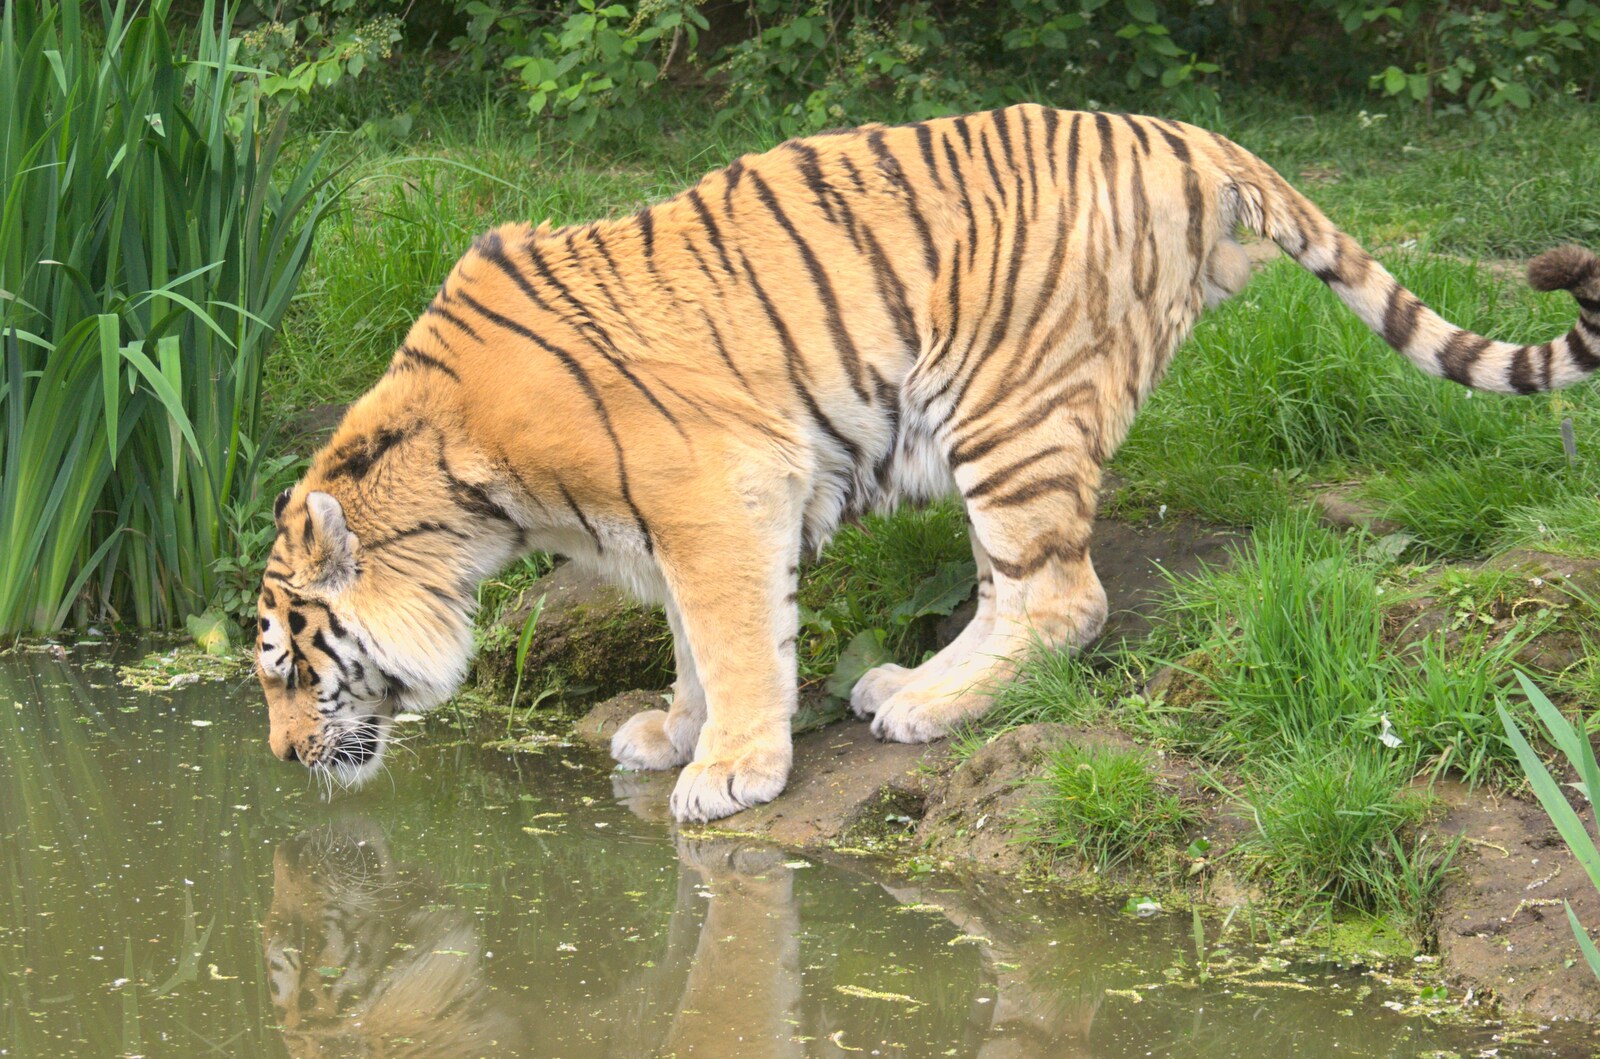 A tiger takes a drink from Another Day at the Zoo, Banham, Norfolk - 2nd May 2011